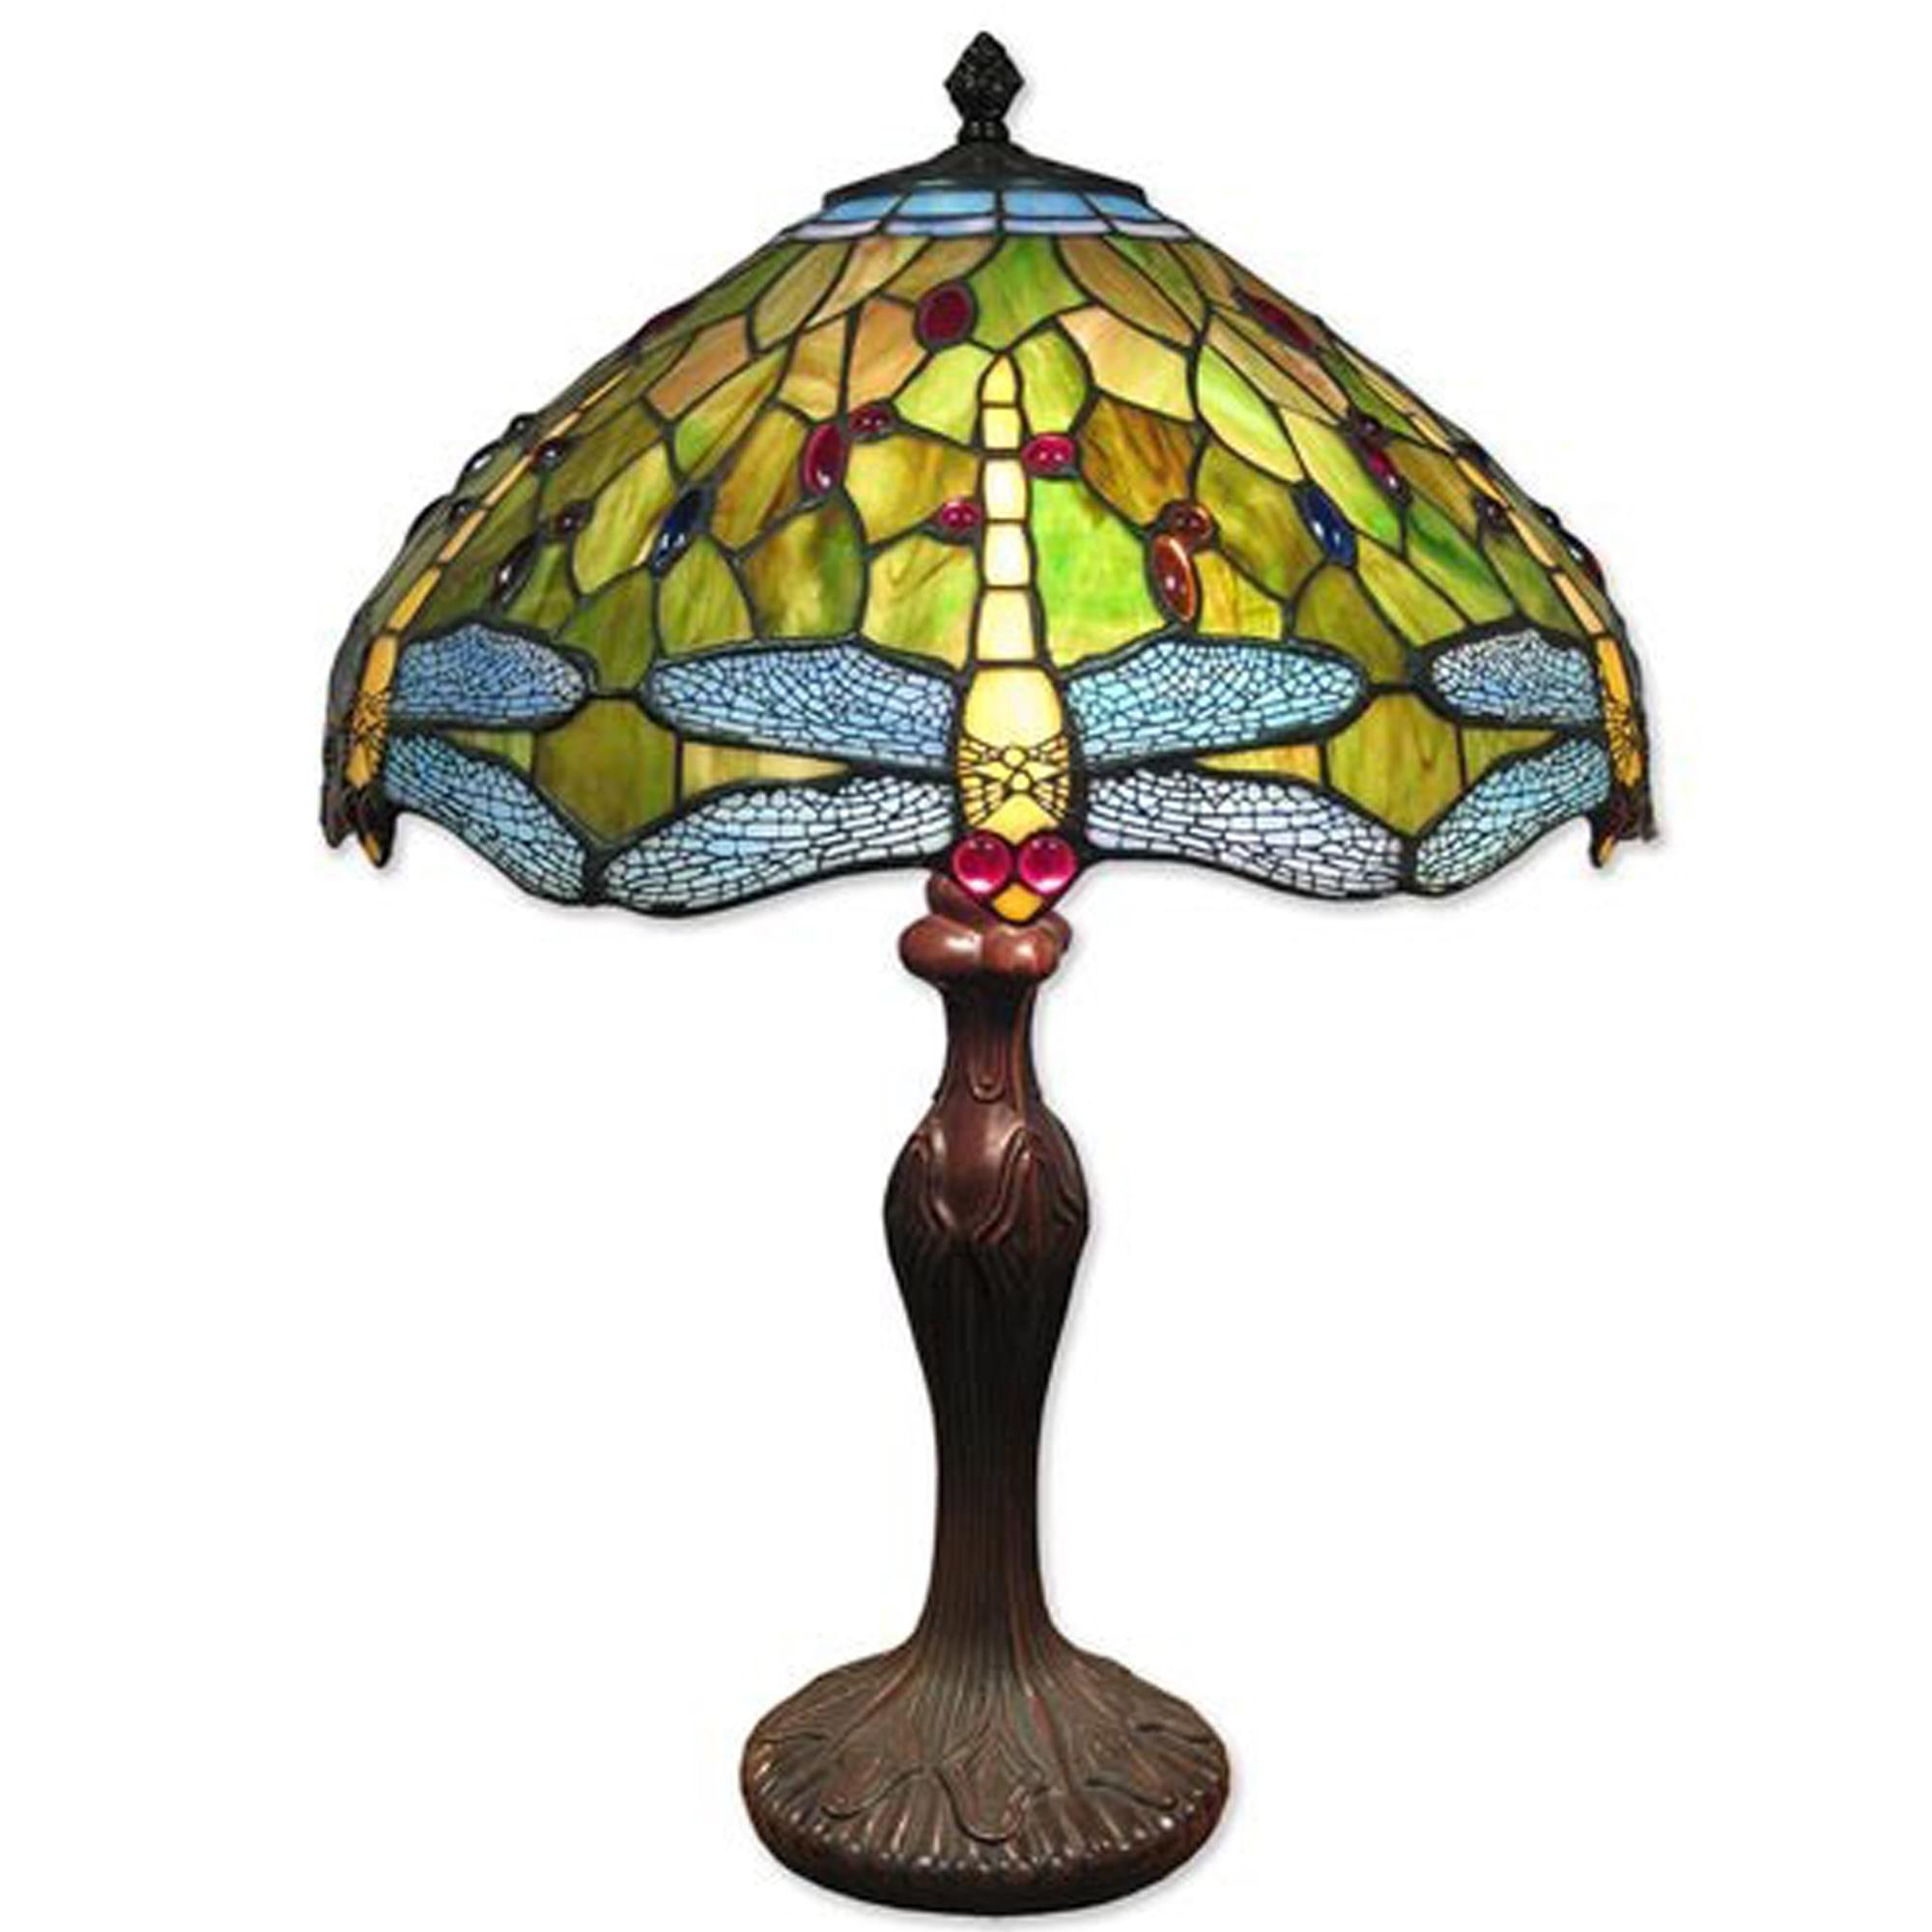 Hsn Tiffany Lamps Antique Ceiling Lights Lamp Shade Repair intended for proportions 2000 X 2000